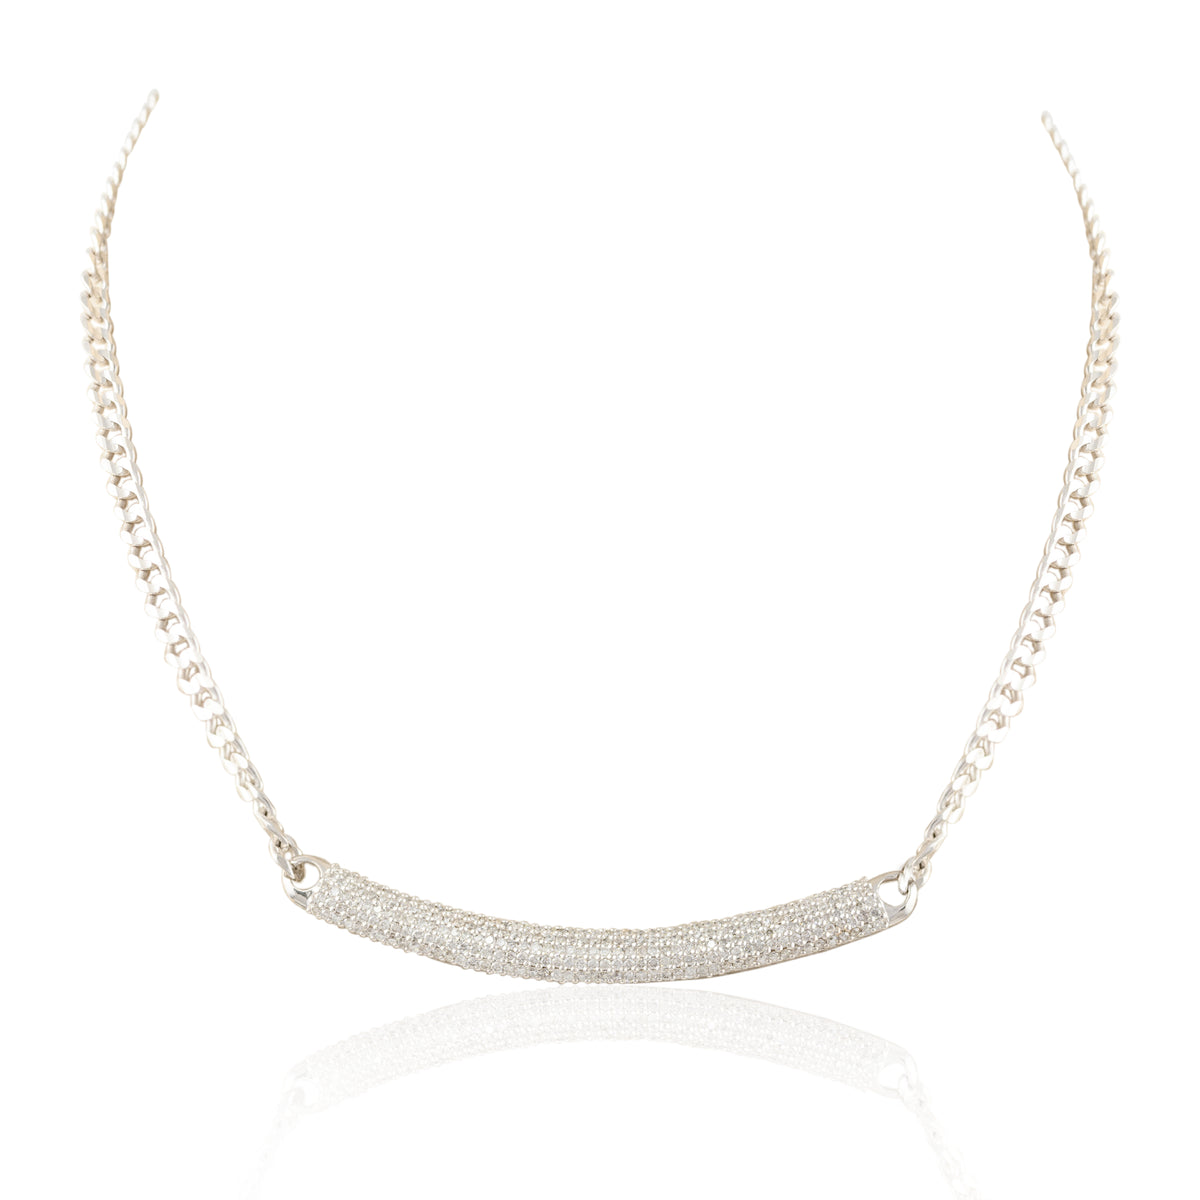 14k Solid White Gold Diamond Chain Necklace